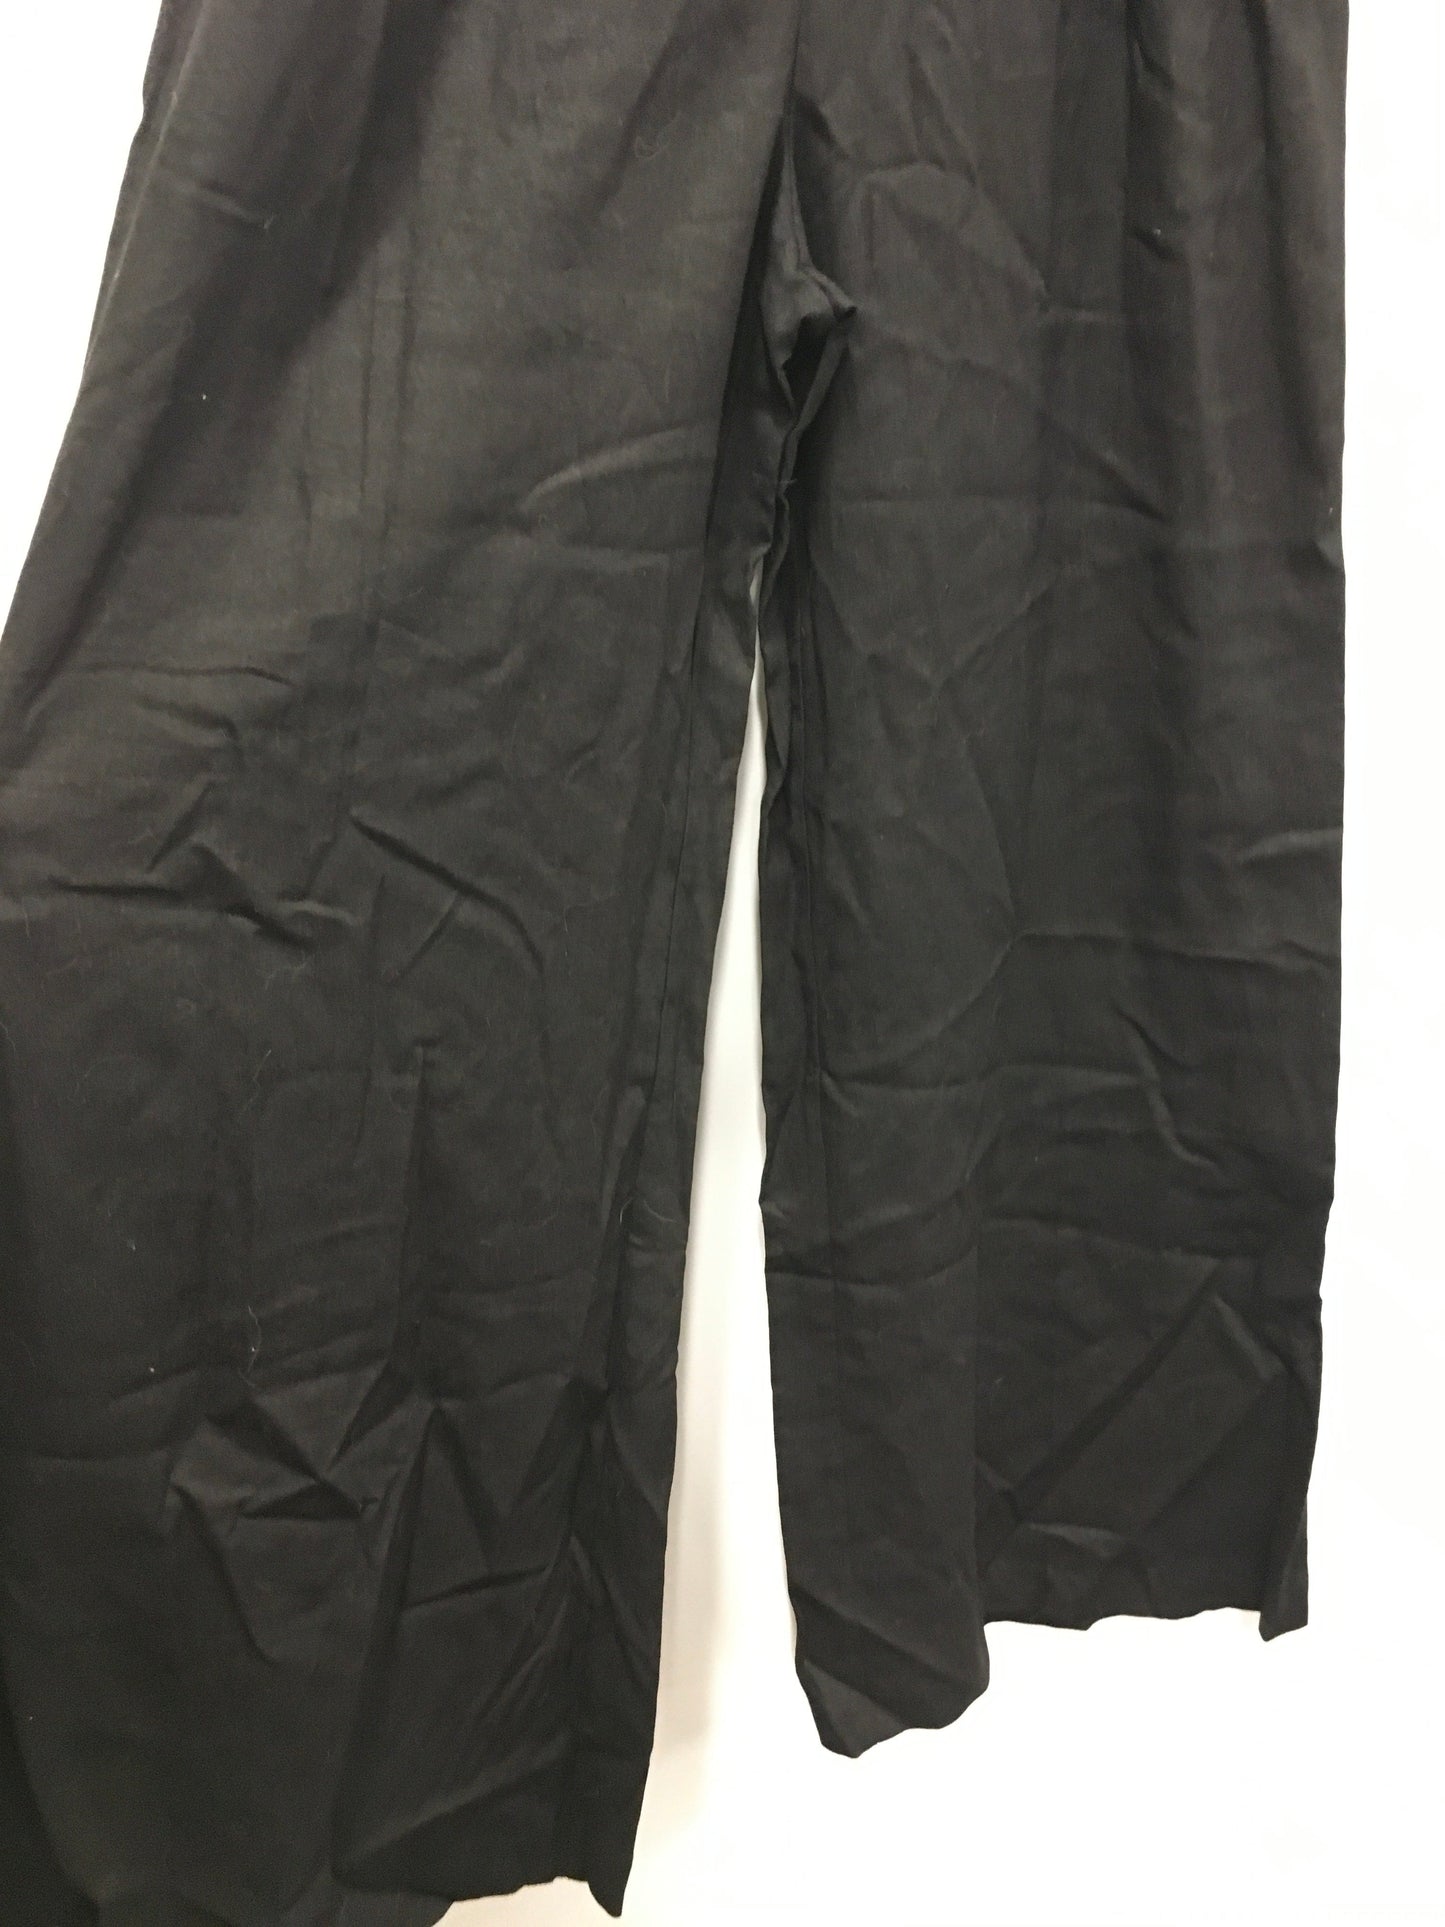 Black Pants Linen House Of Harlow, Size 6